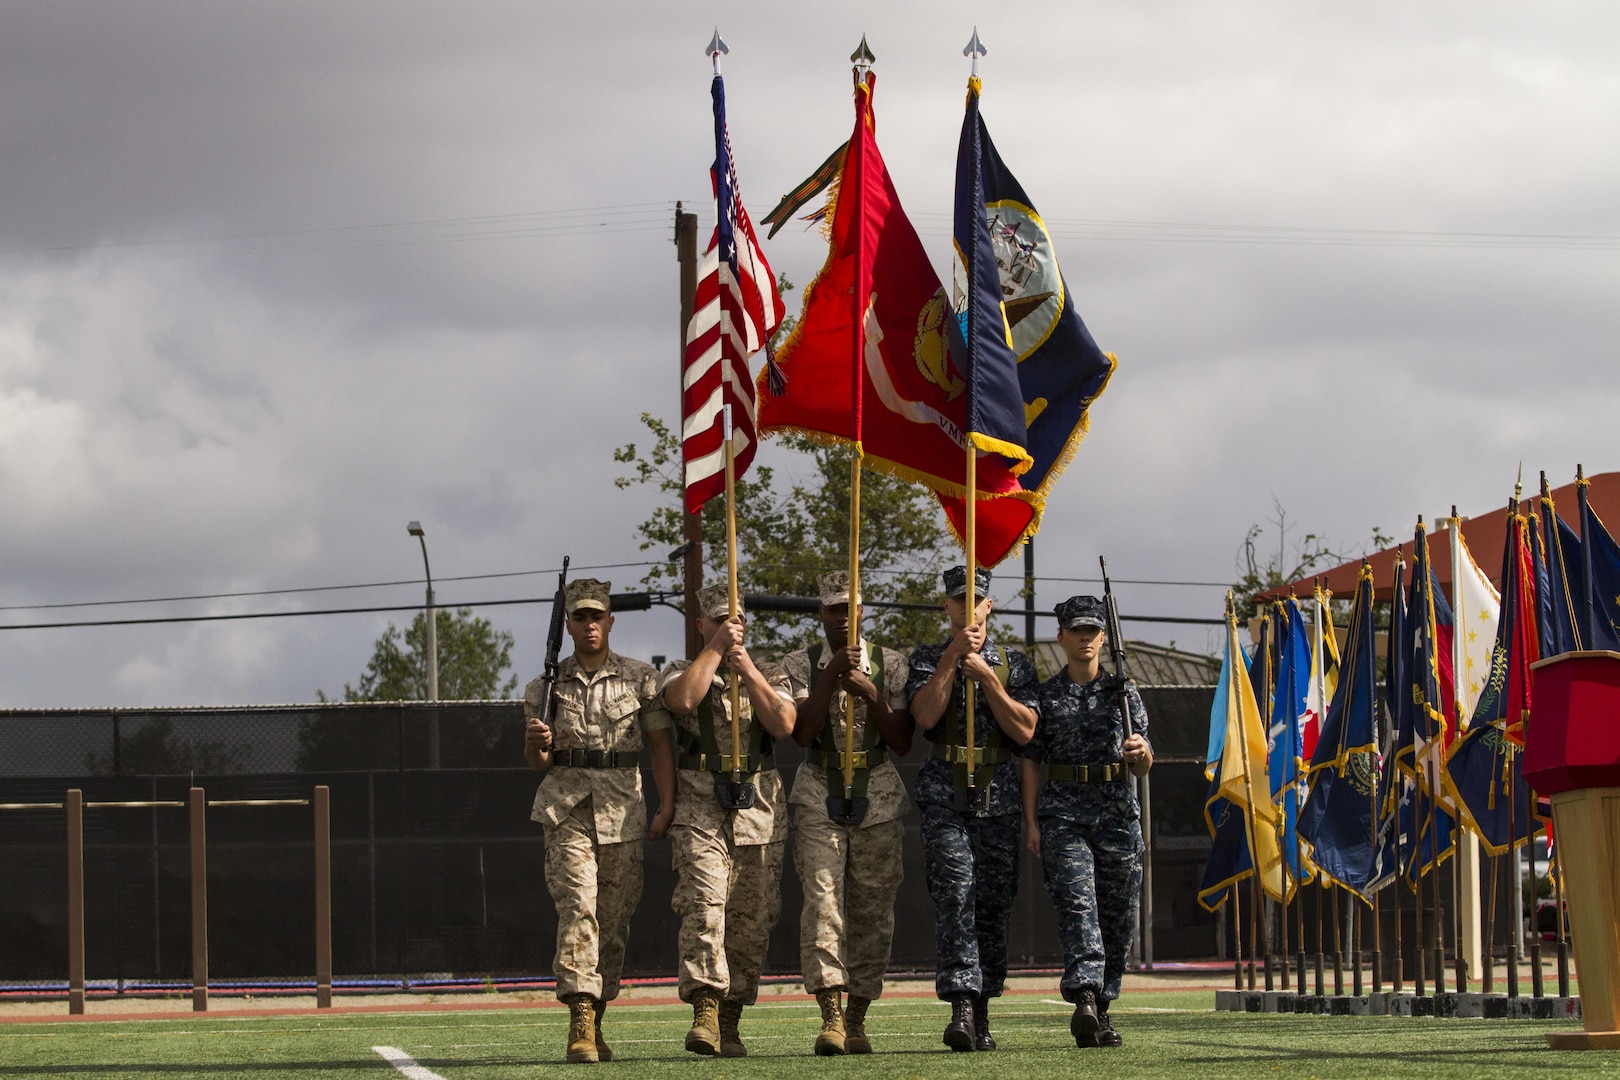 A combined Marine, Sailor color guard marches onto the field May 14 during the opening ceremony of the 2015 Armed Forces Soccer Championship at Marine Corps Air Station Miramar, Calif. Service members from each branch will compete in the championship games.